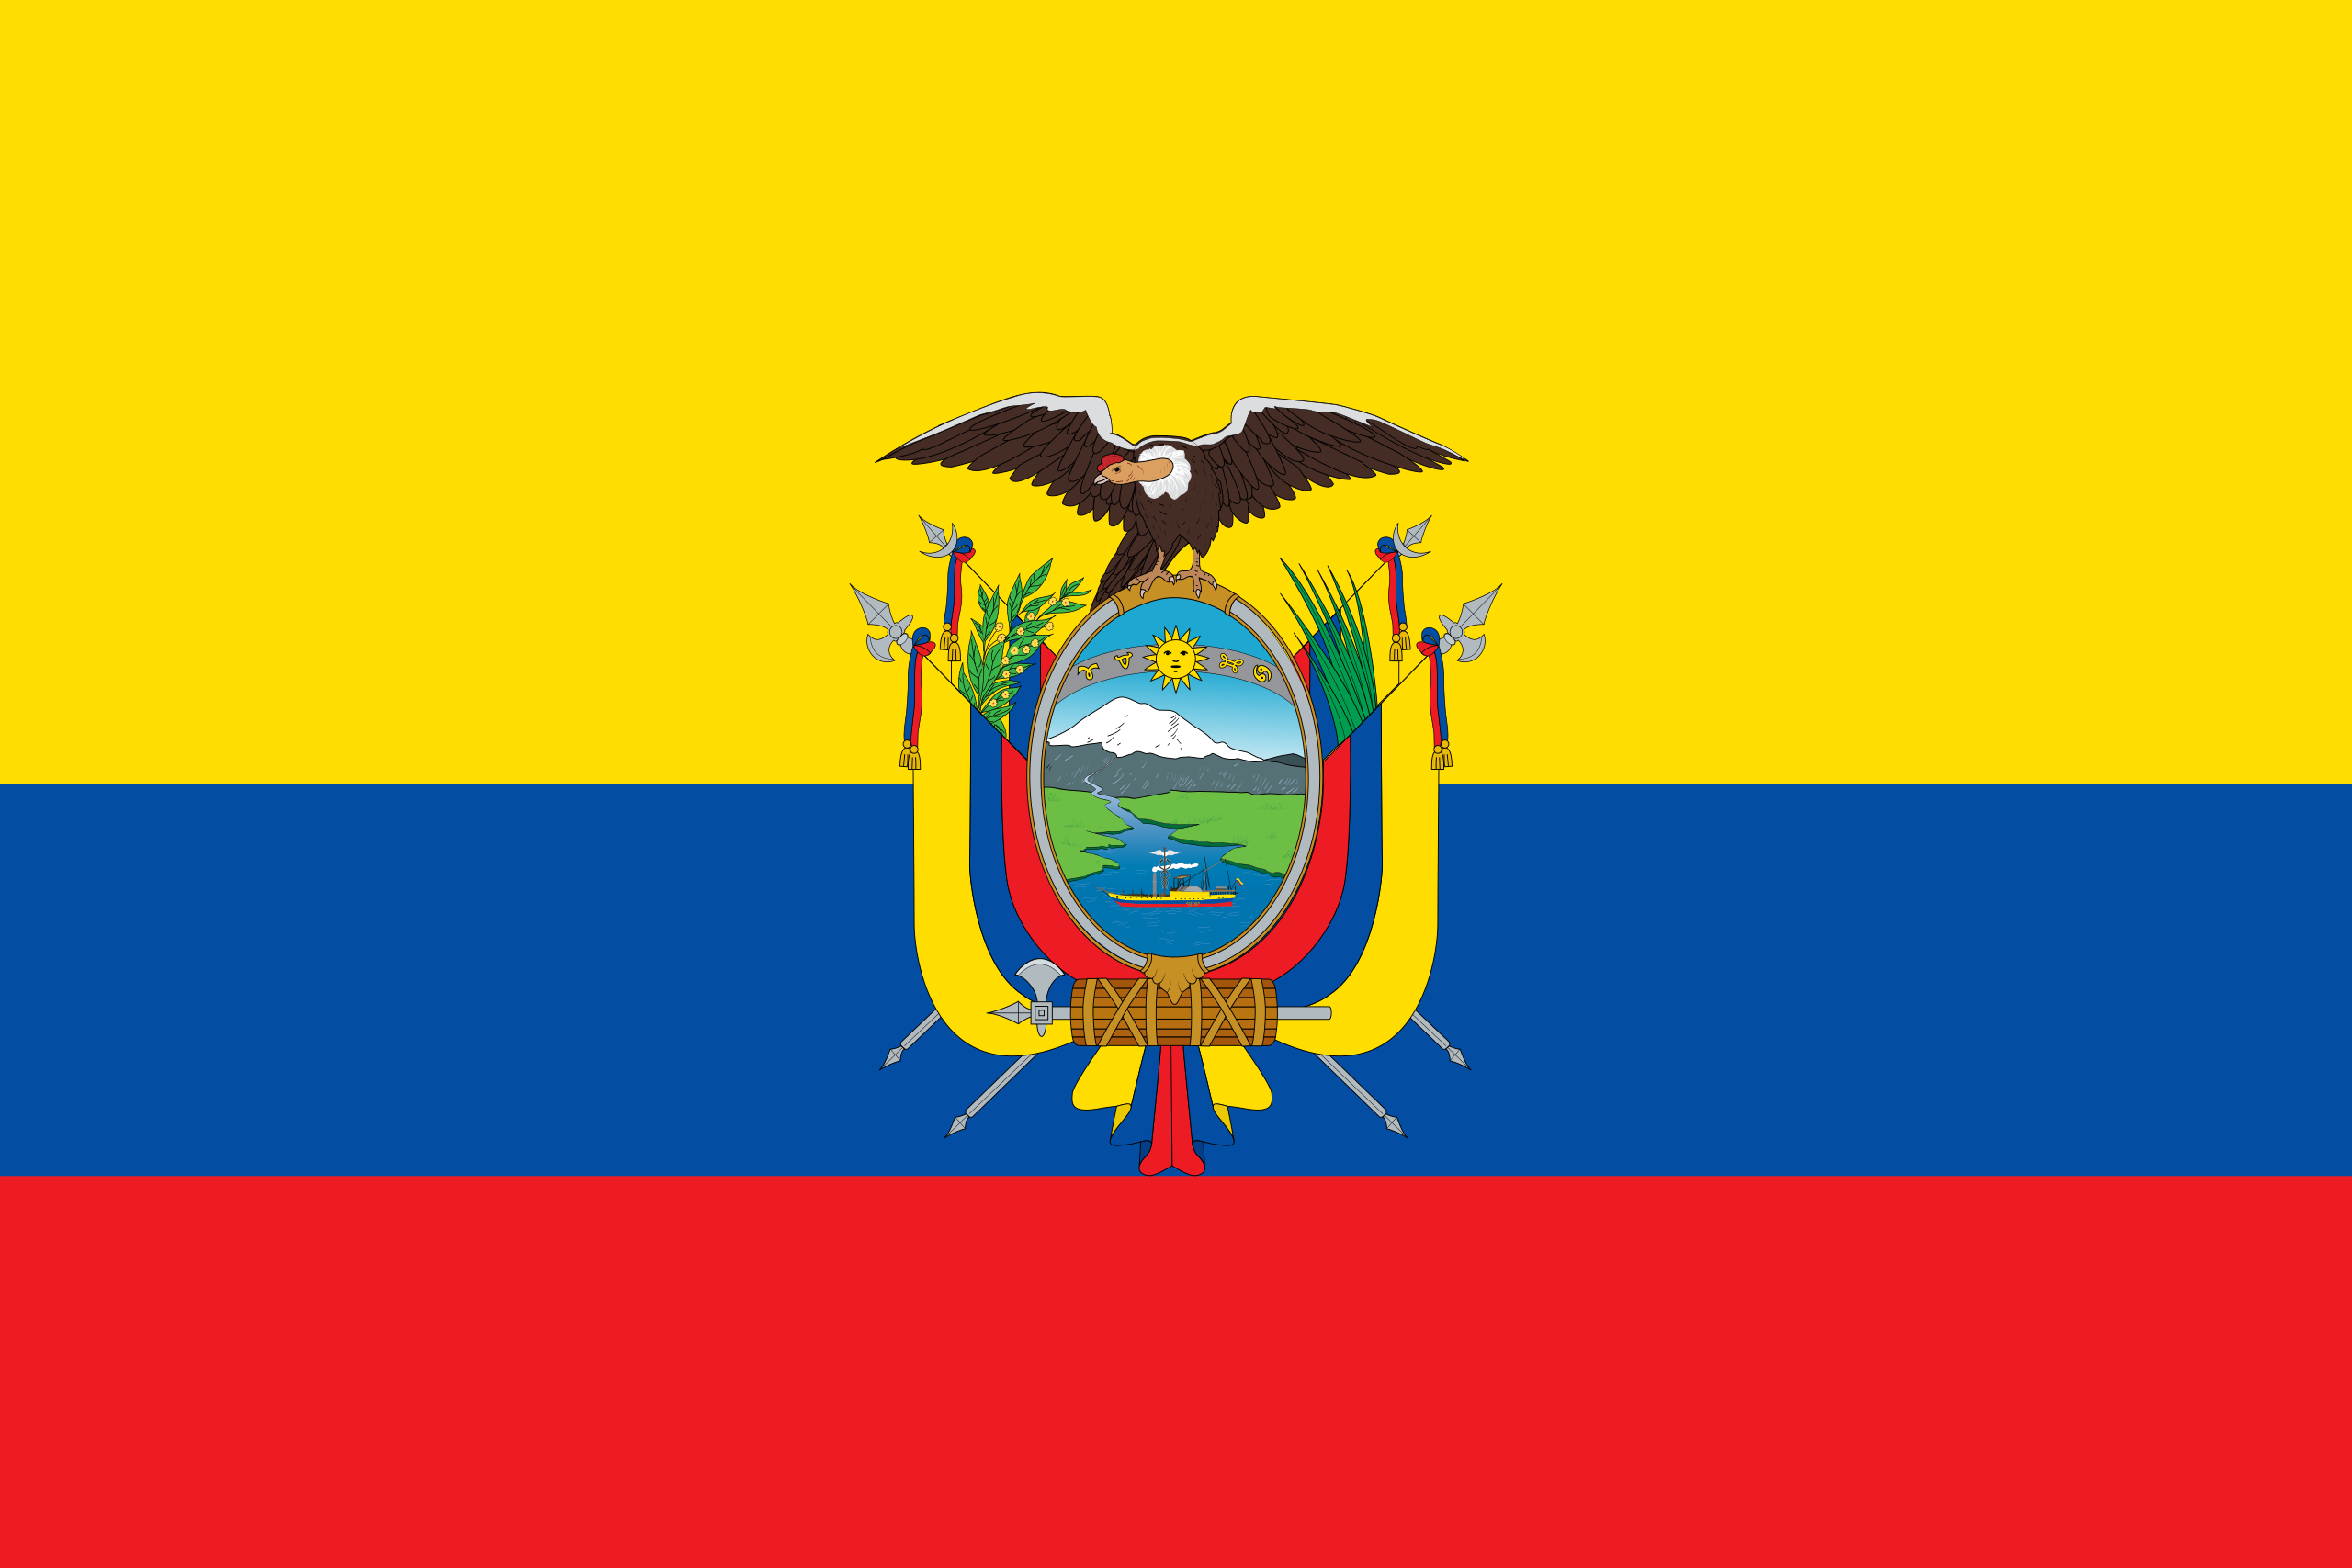 ART Approves Listing of TREES Concept for Ecuador